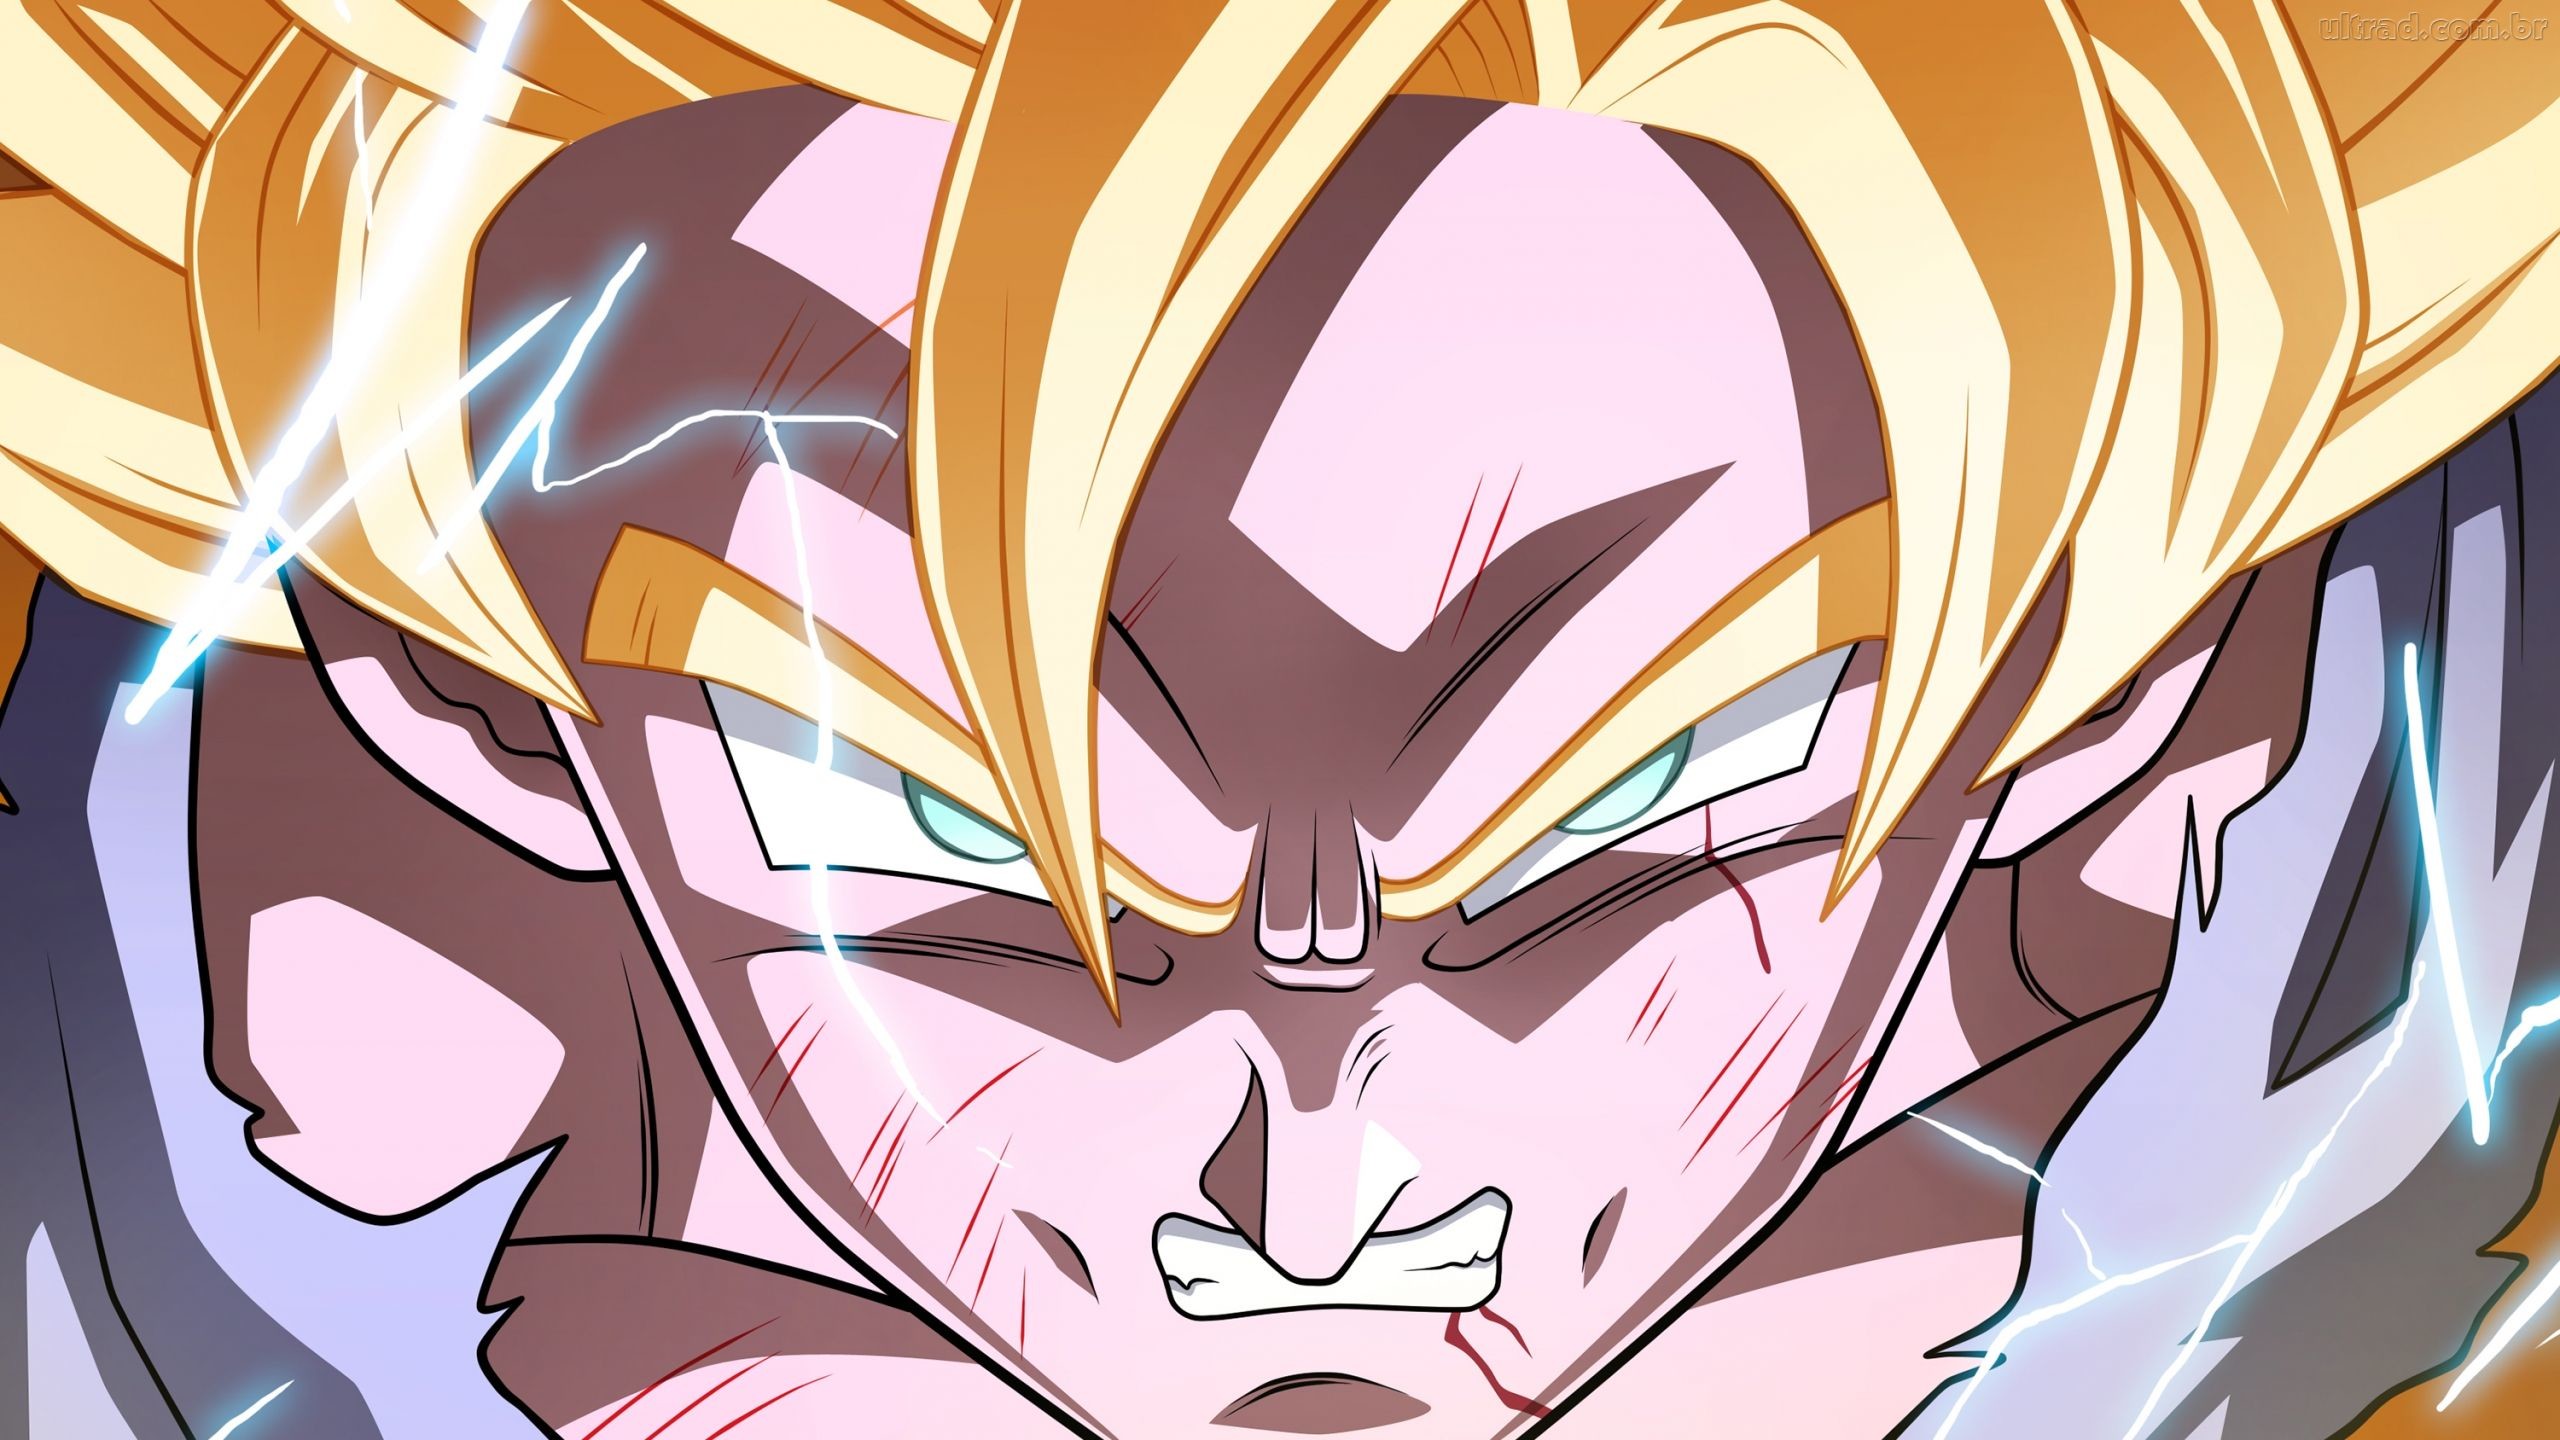 Super Saiyan 2 Goku, pissed off. I didnt have much time on my hands to do it, but it was worth the time I spent on it, good fun